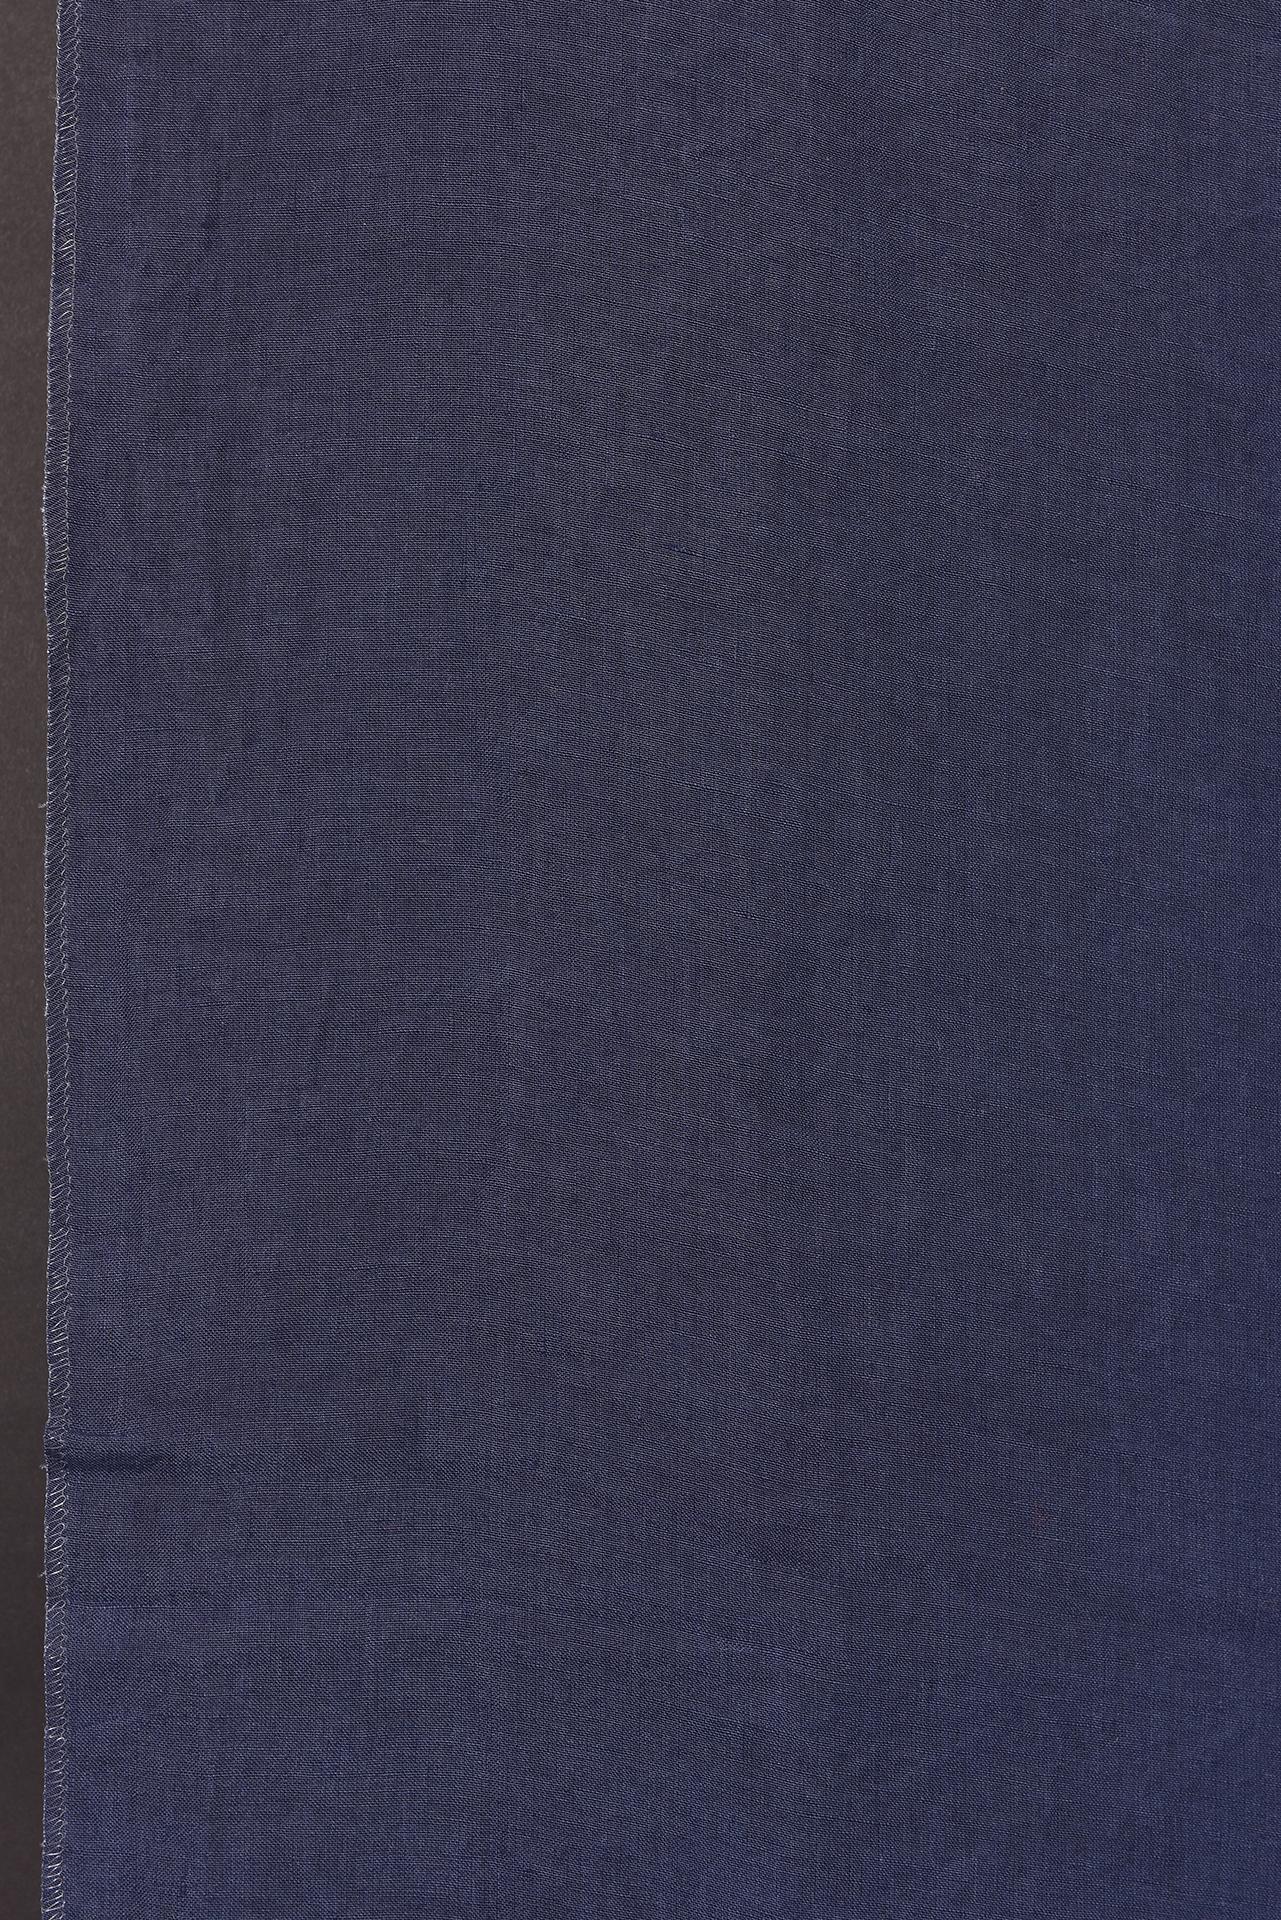 Shaded Blue Linen for Curtain or Other Use In Excellent Condition For Sale In Alessandria, Piemonte